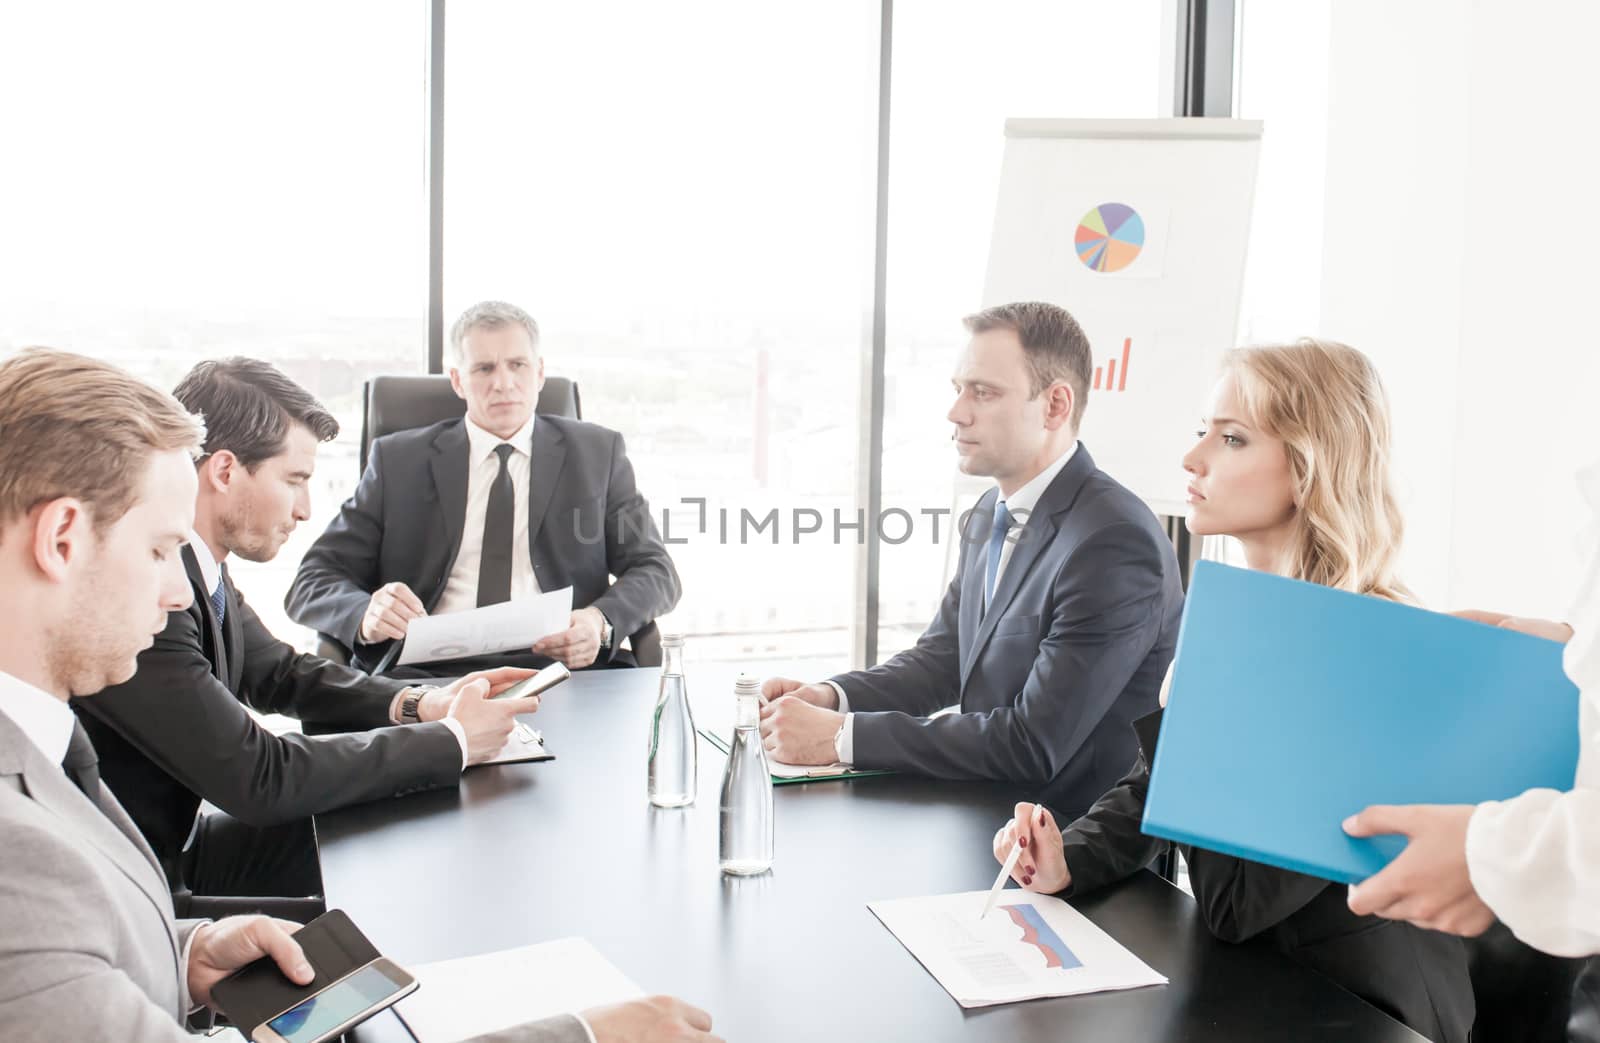 Group of business people discussing with analyzing data financial reports at the office desk